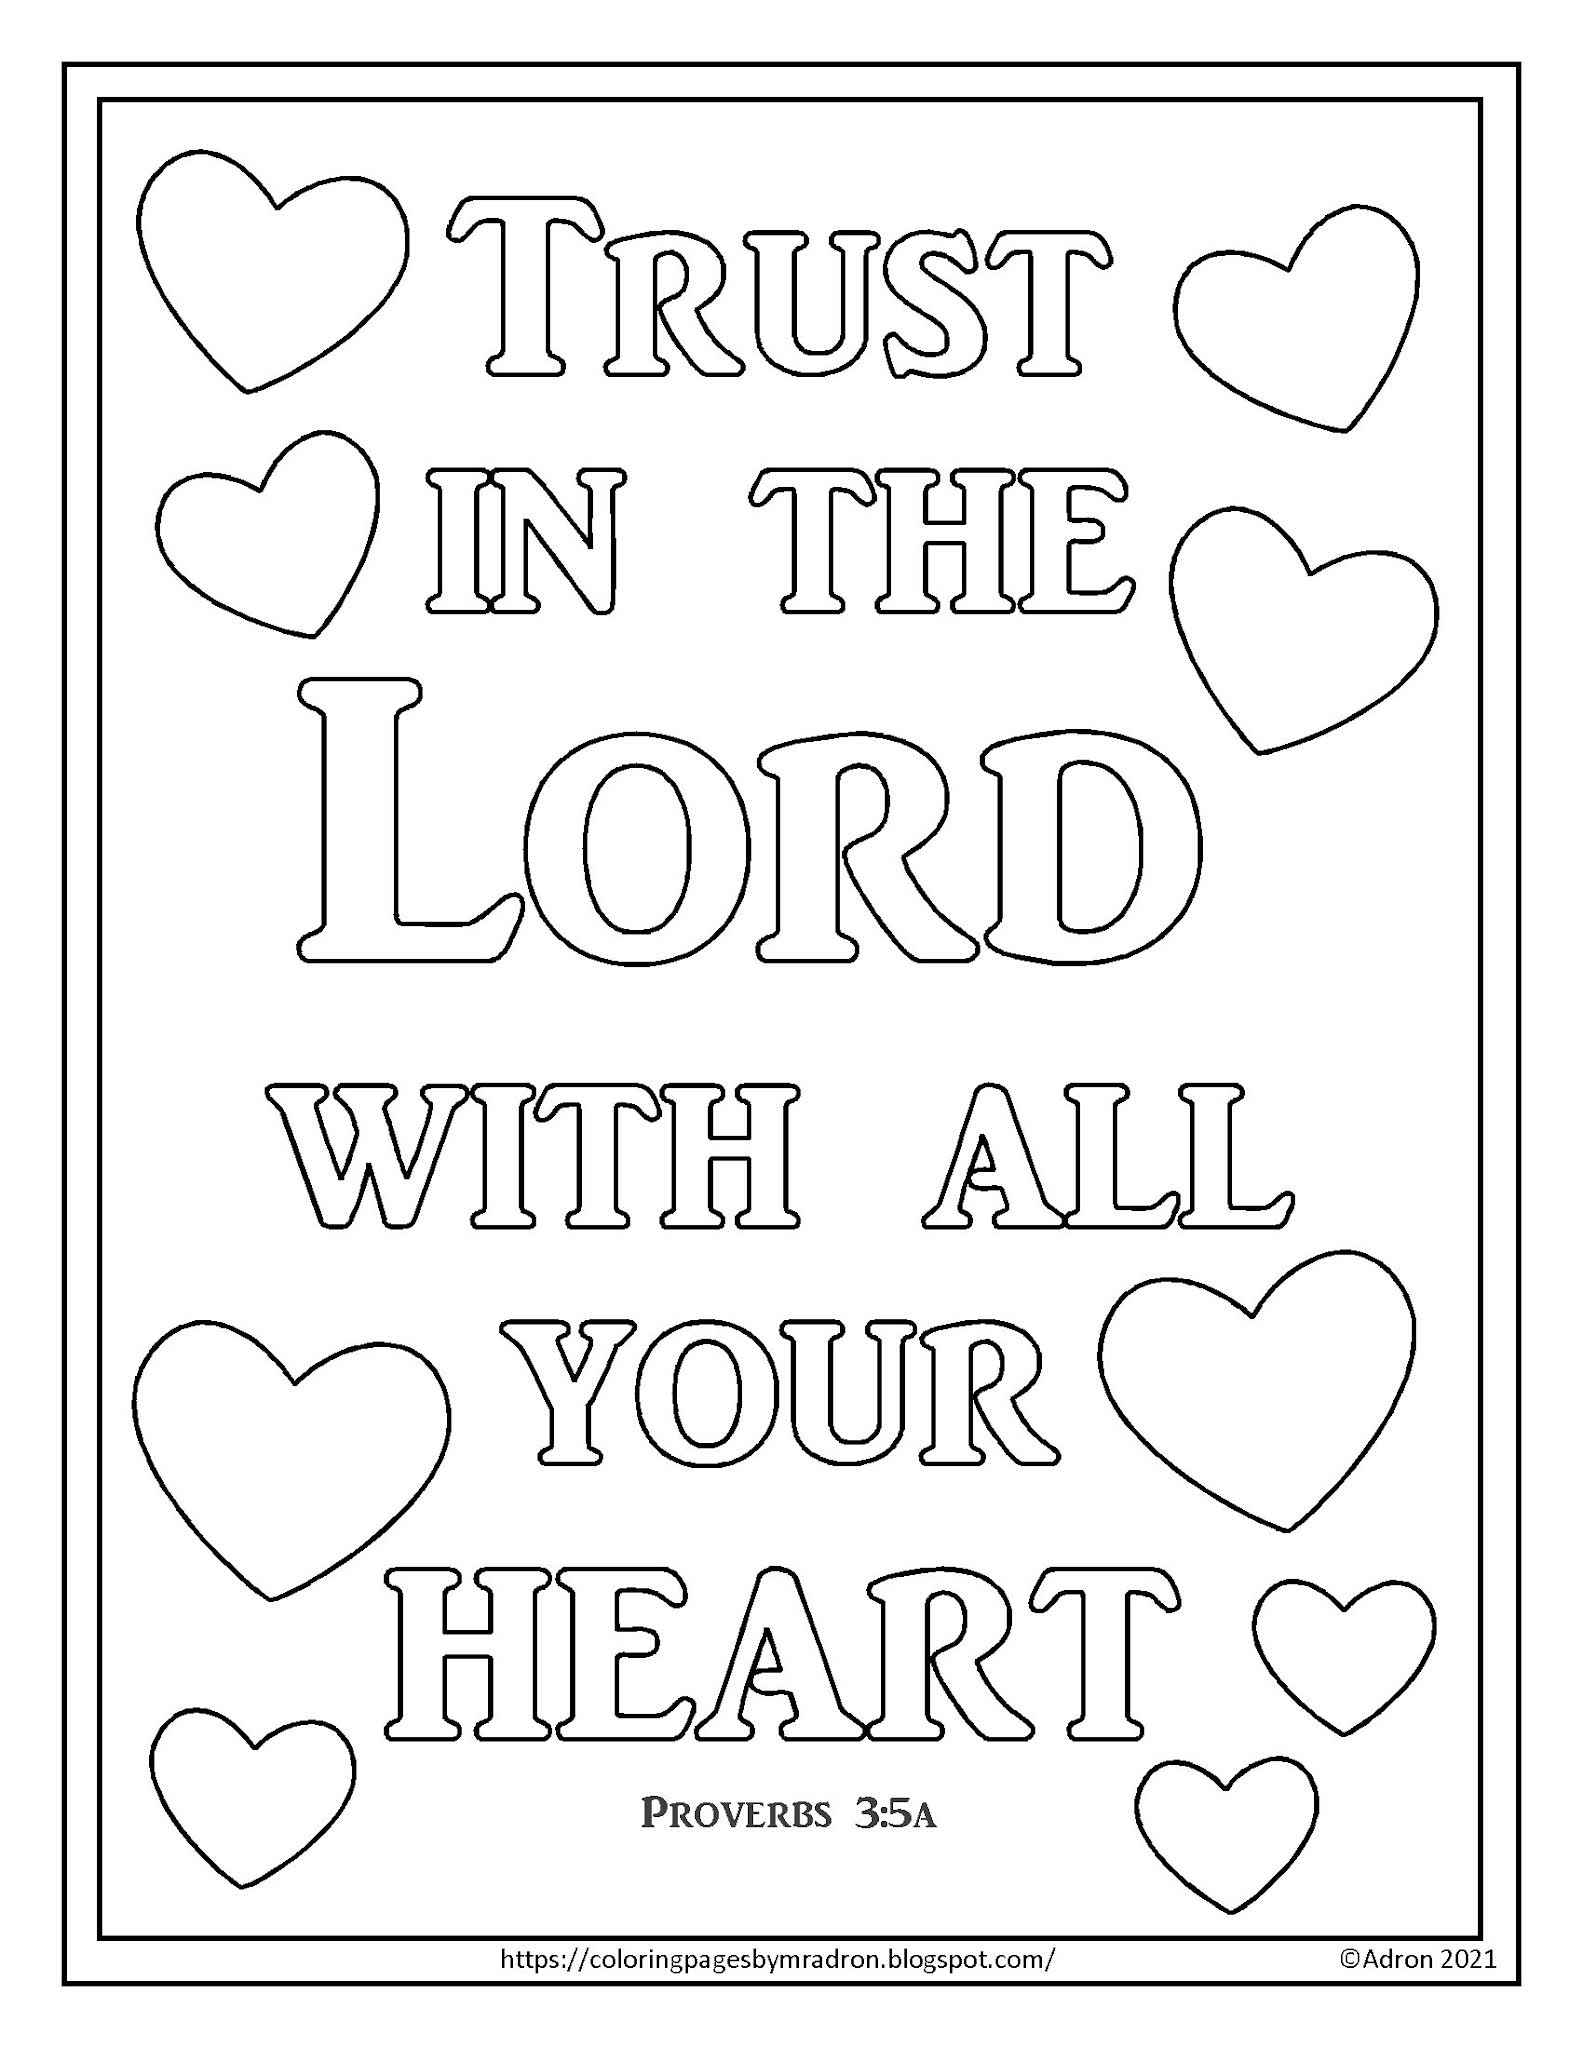 96-best-ideas-for-coloring-free-scripture-coloring-sheets